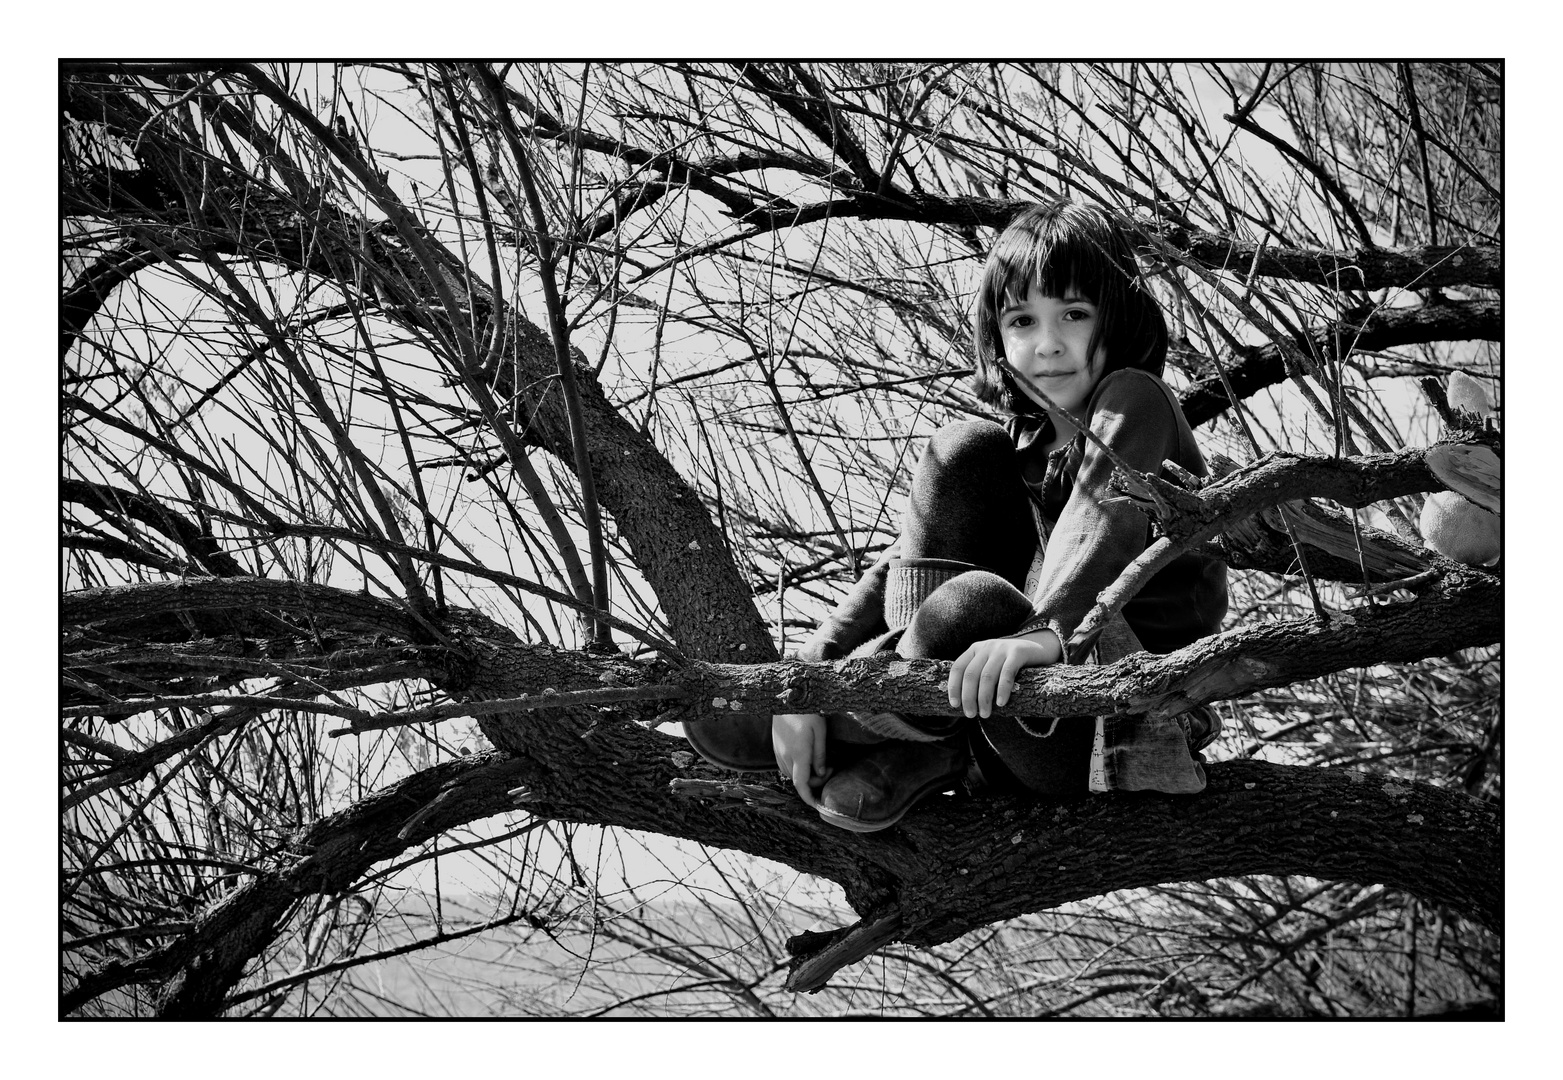 Somerset. 07. Girl in tree by the sea.